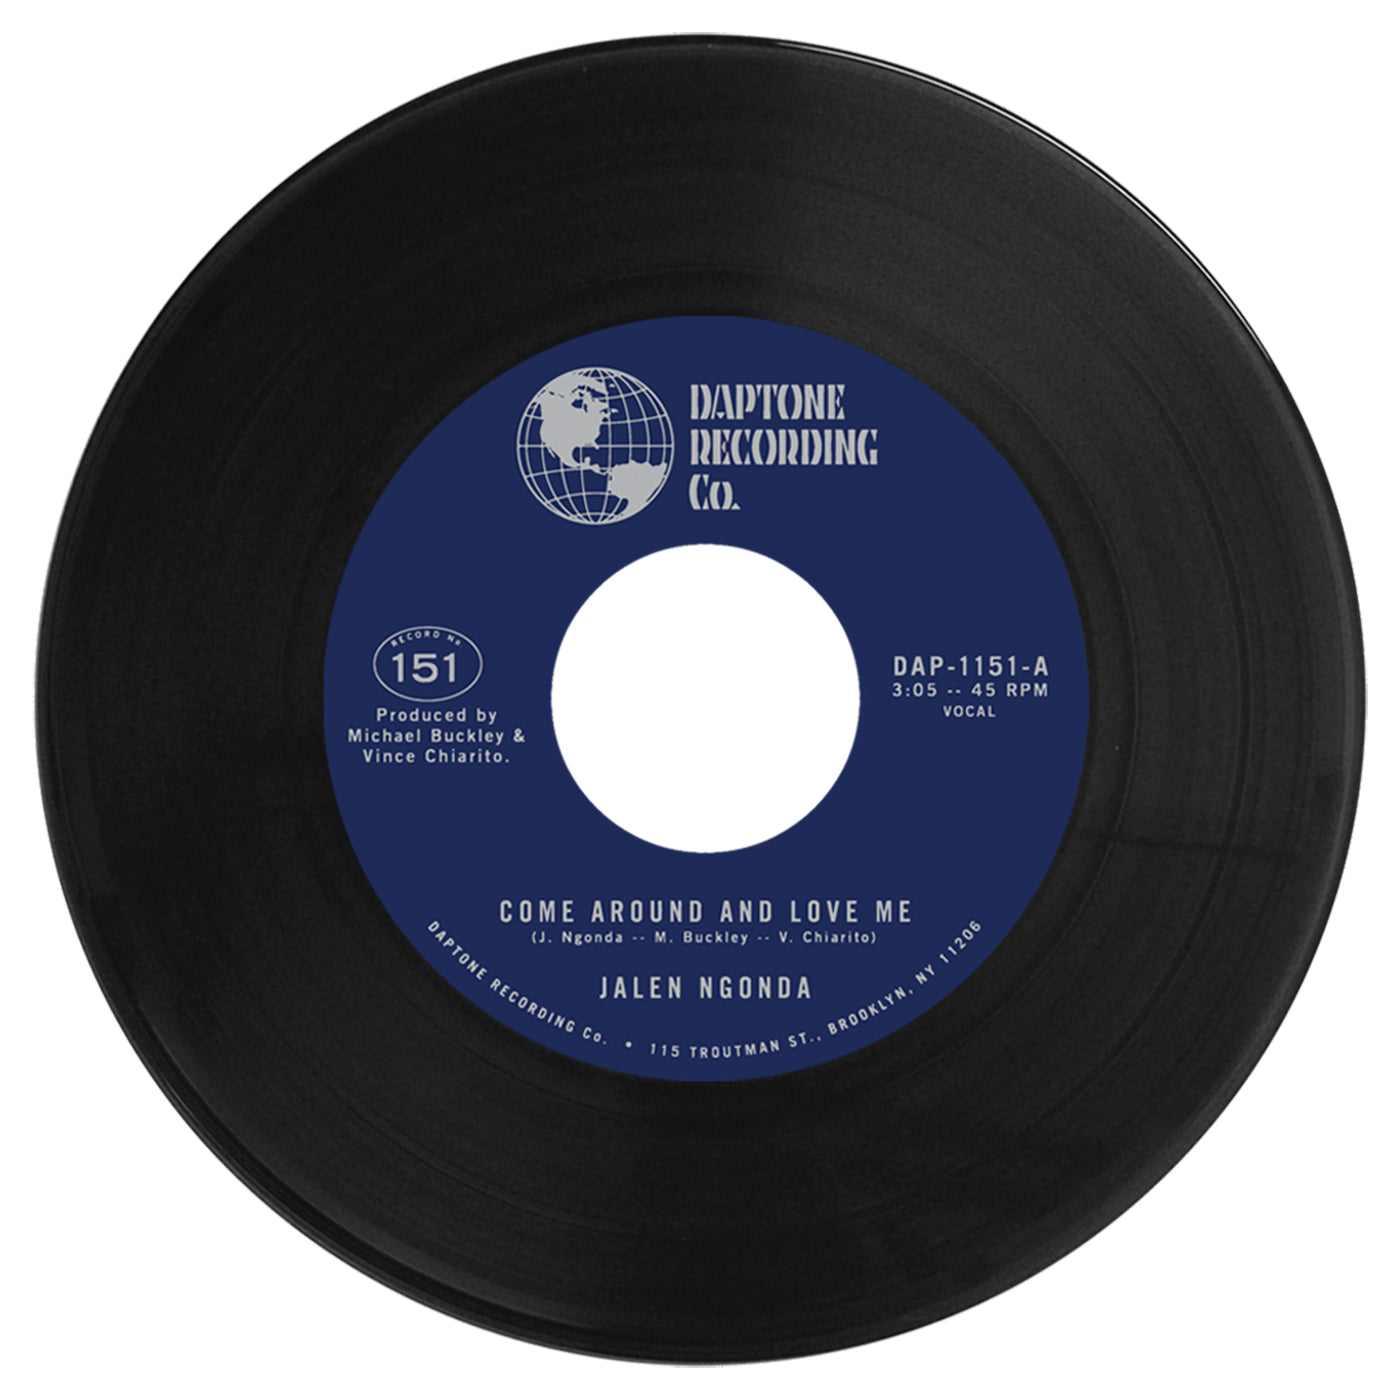 Jalen Ngonda ""Come Around and Love Me" / "What Is Left To Do" 45